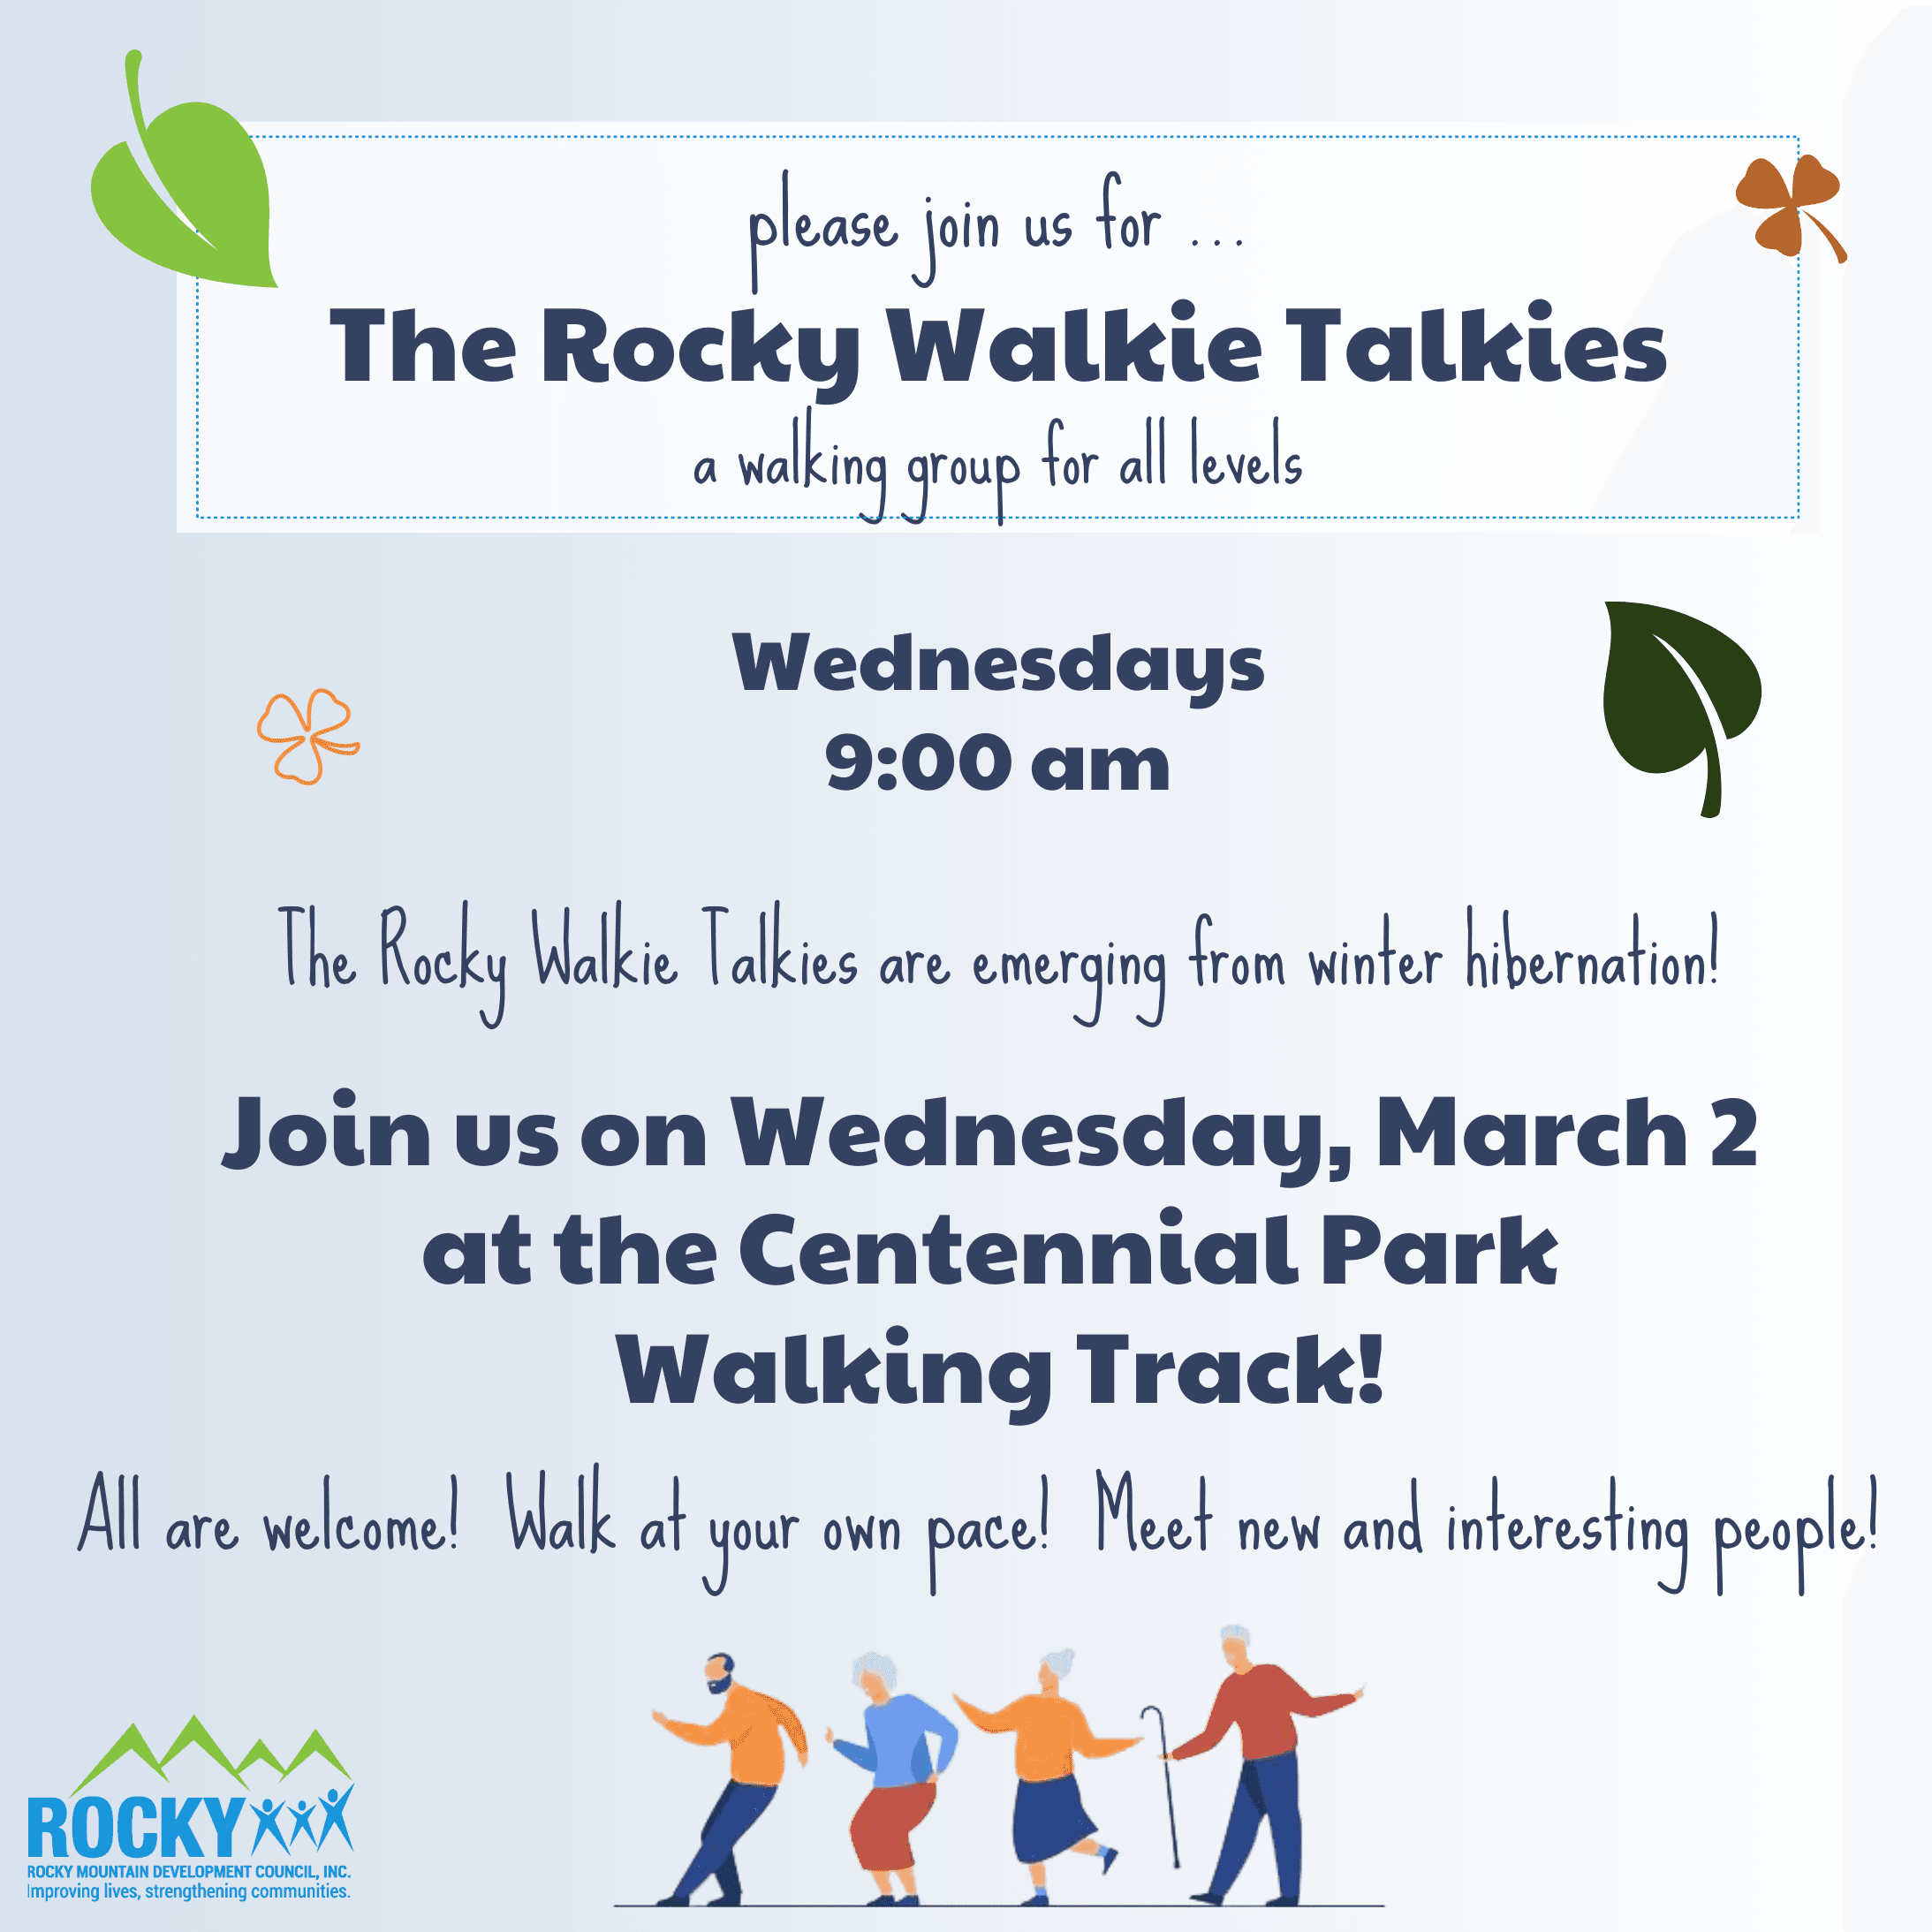 Join the Rocky Walkie Talkies on Wednesdays at Centennial Park at 9 am, beginning Wednesday, March 2!